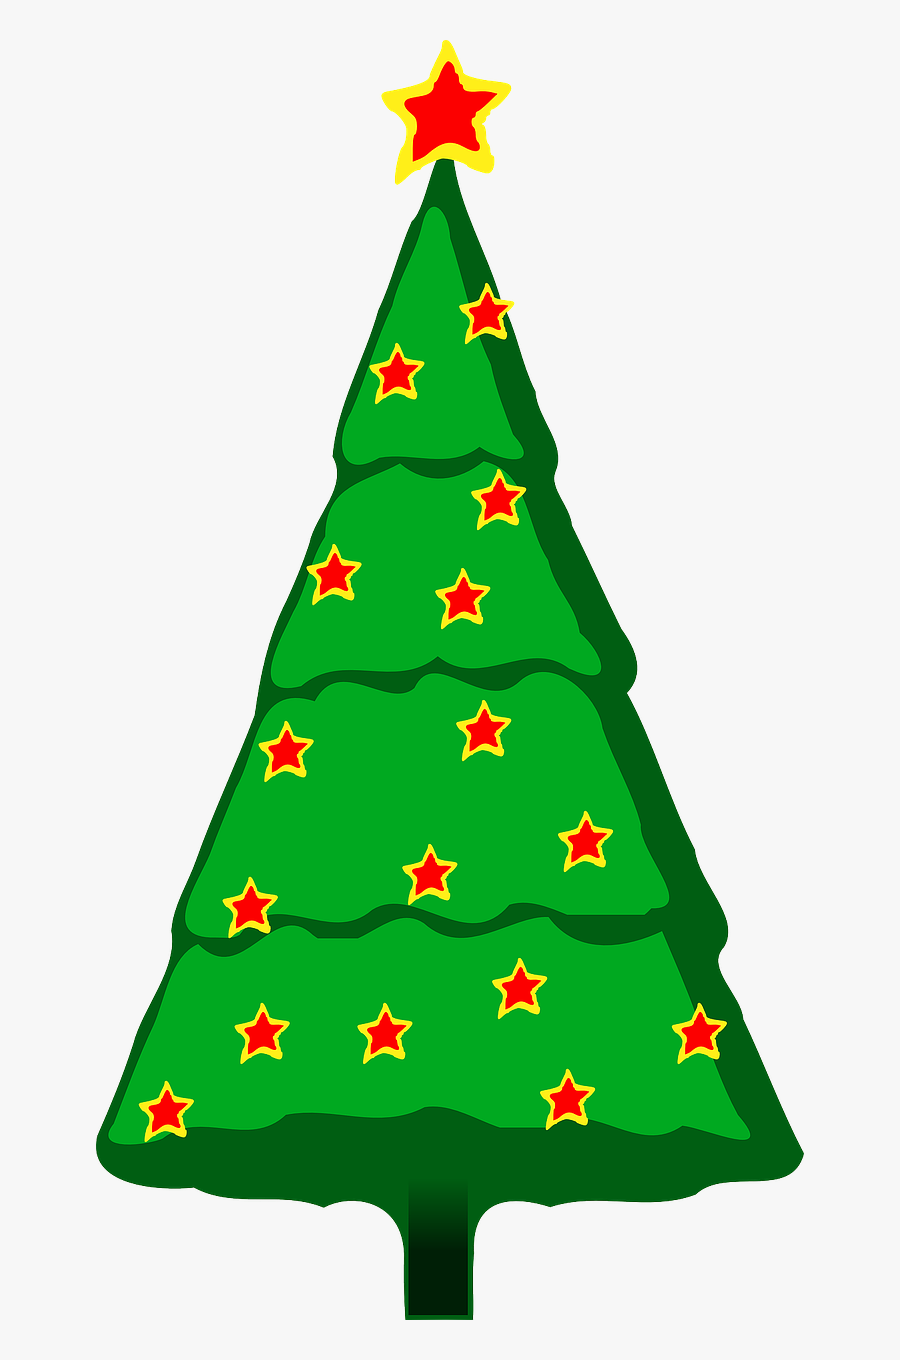 Christmas Tree Xmas Celebration Png Image - Christmas Tree Clipart Small, Transparent Clipart